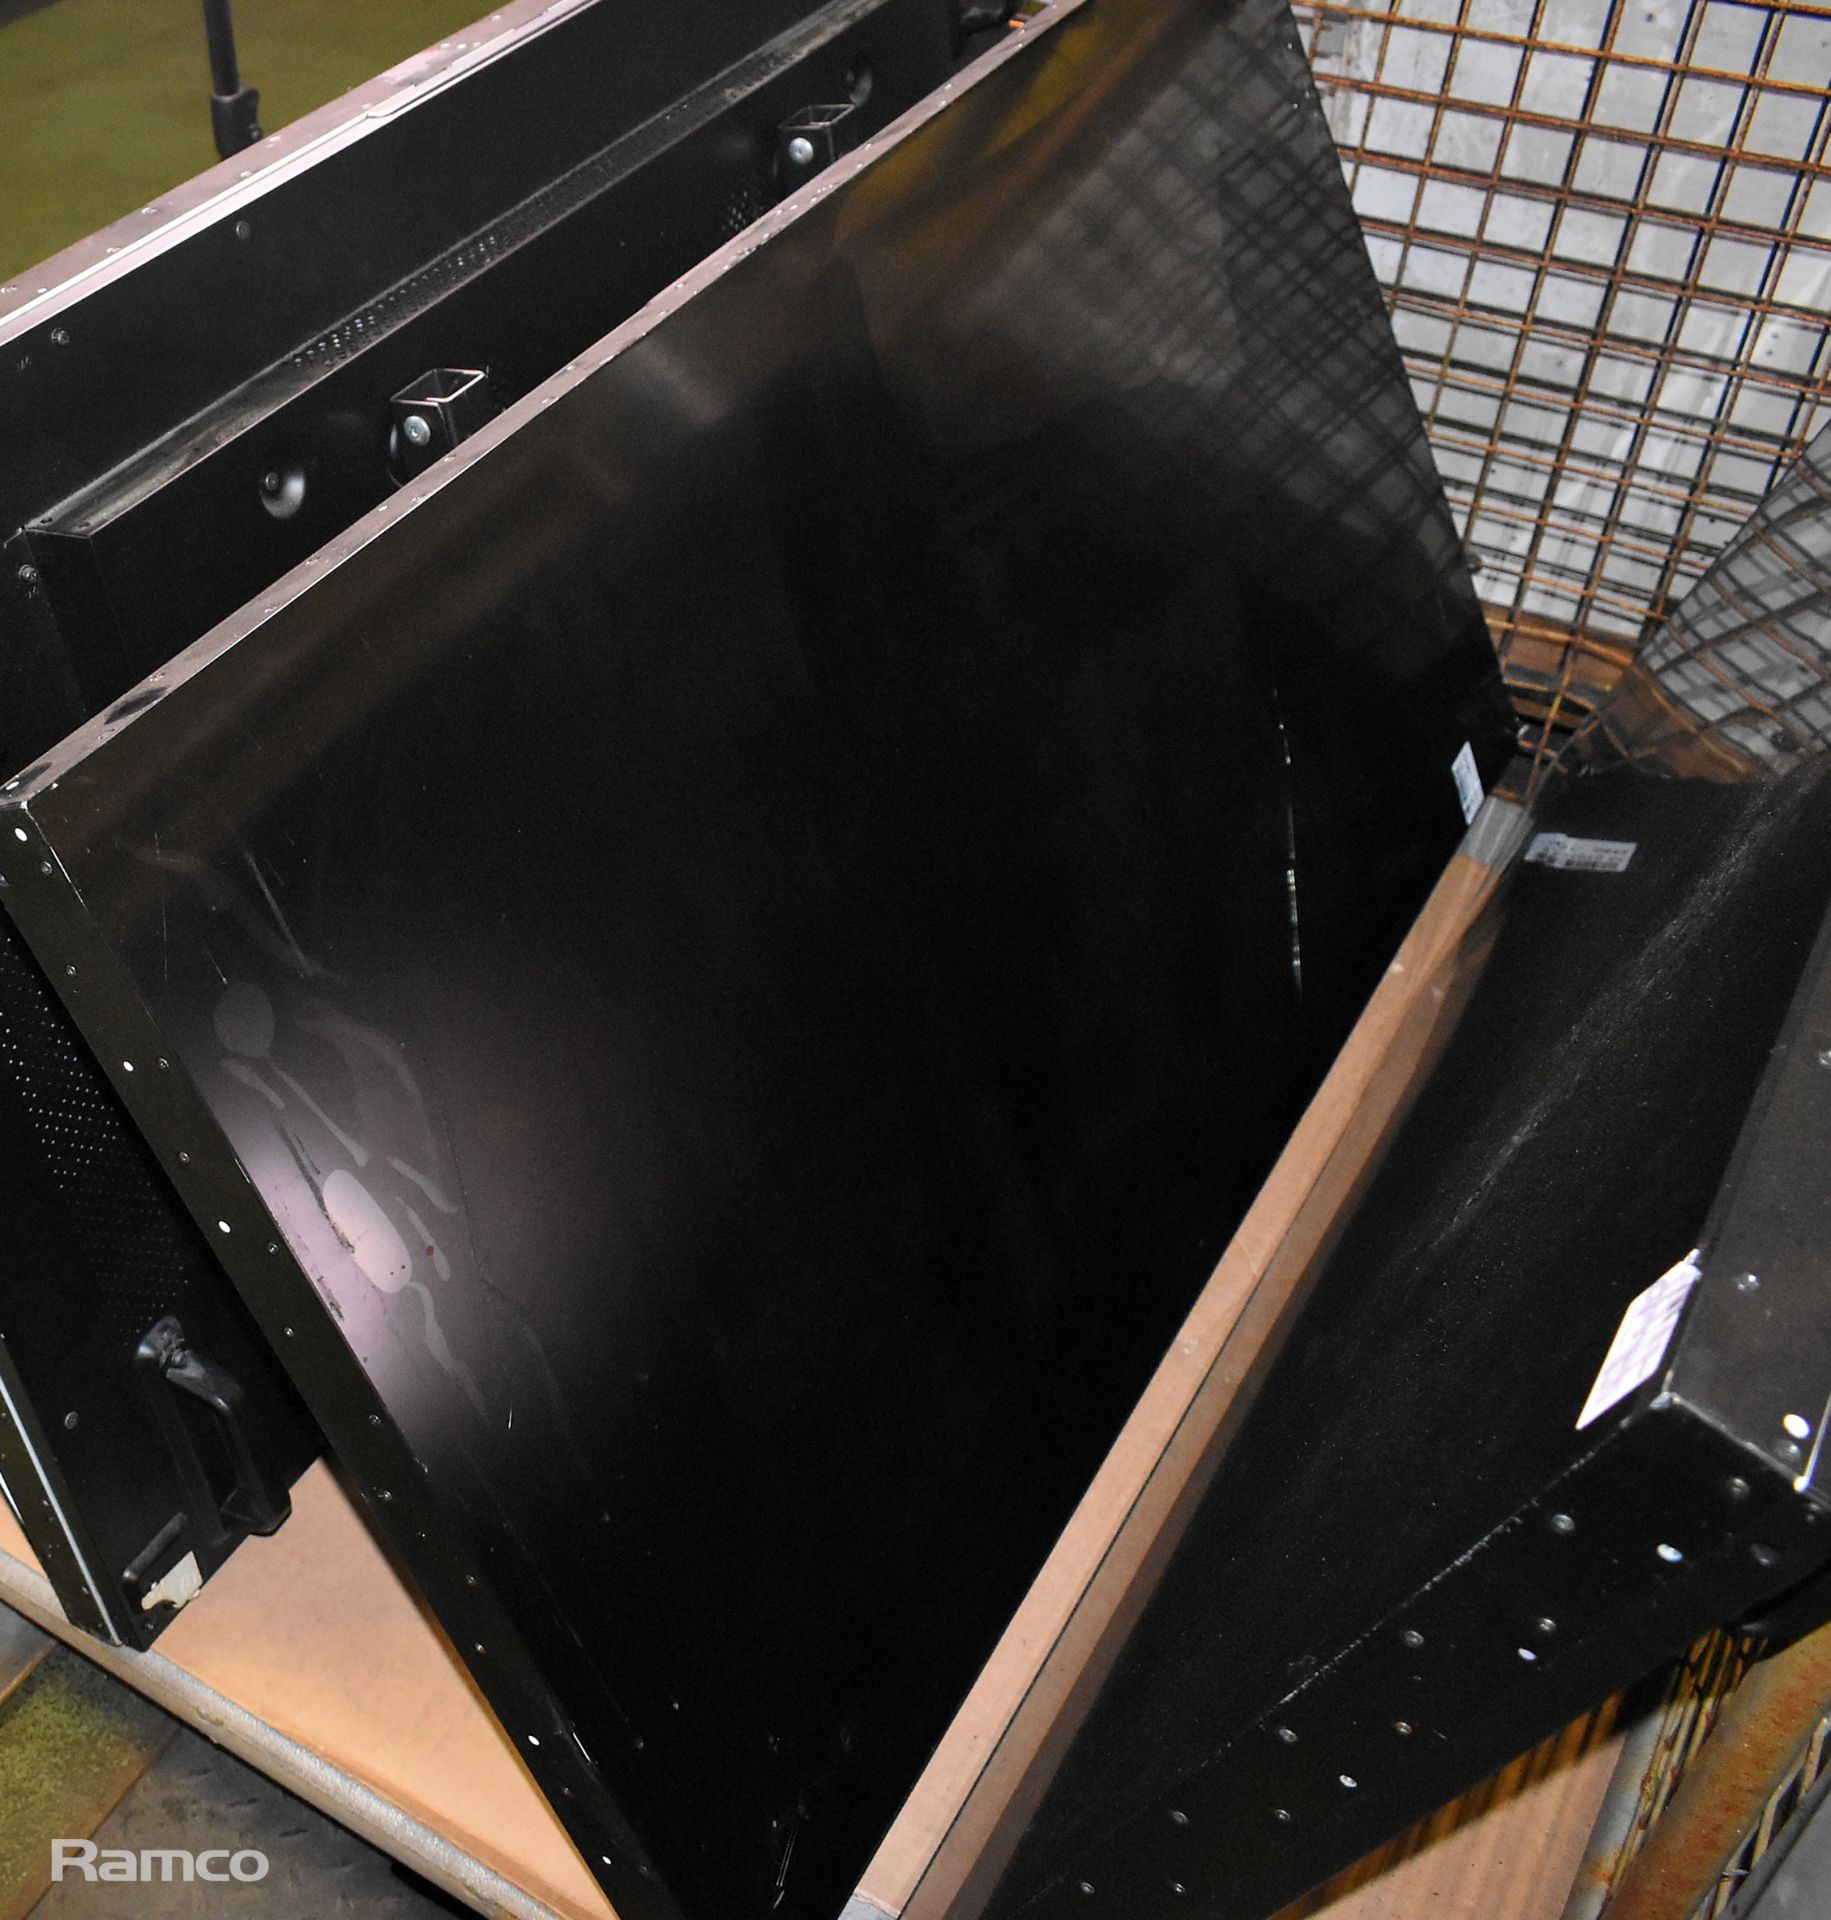 Phillips BDL5588XC 55 inch full HD LED video wall - SCREENS ARE DAMAGED AND NEEDS REPAIRING - Image 5 of 7